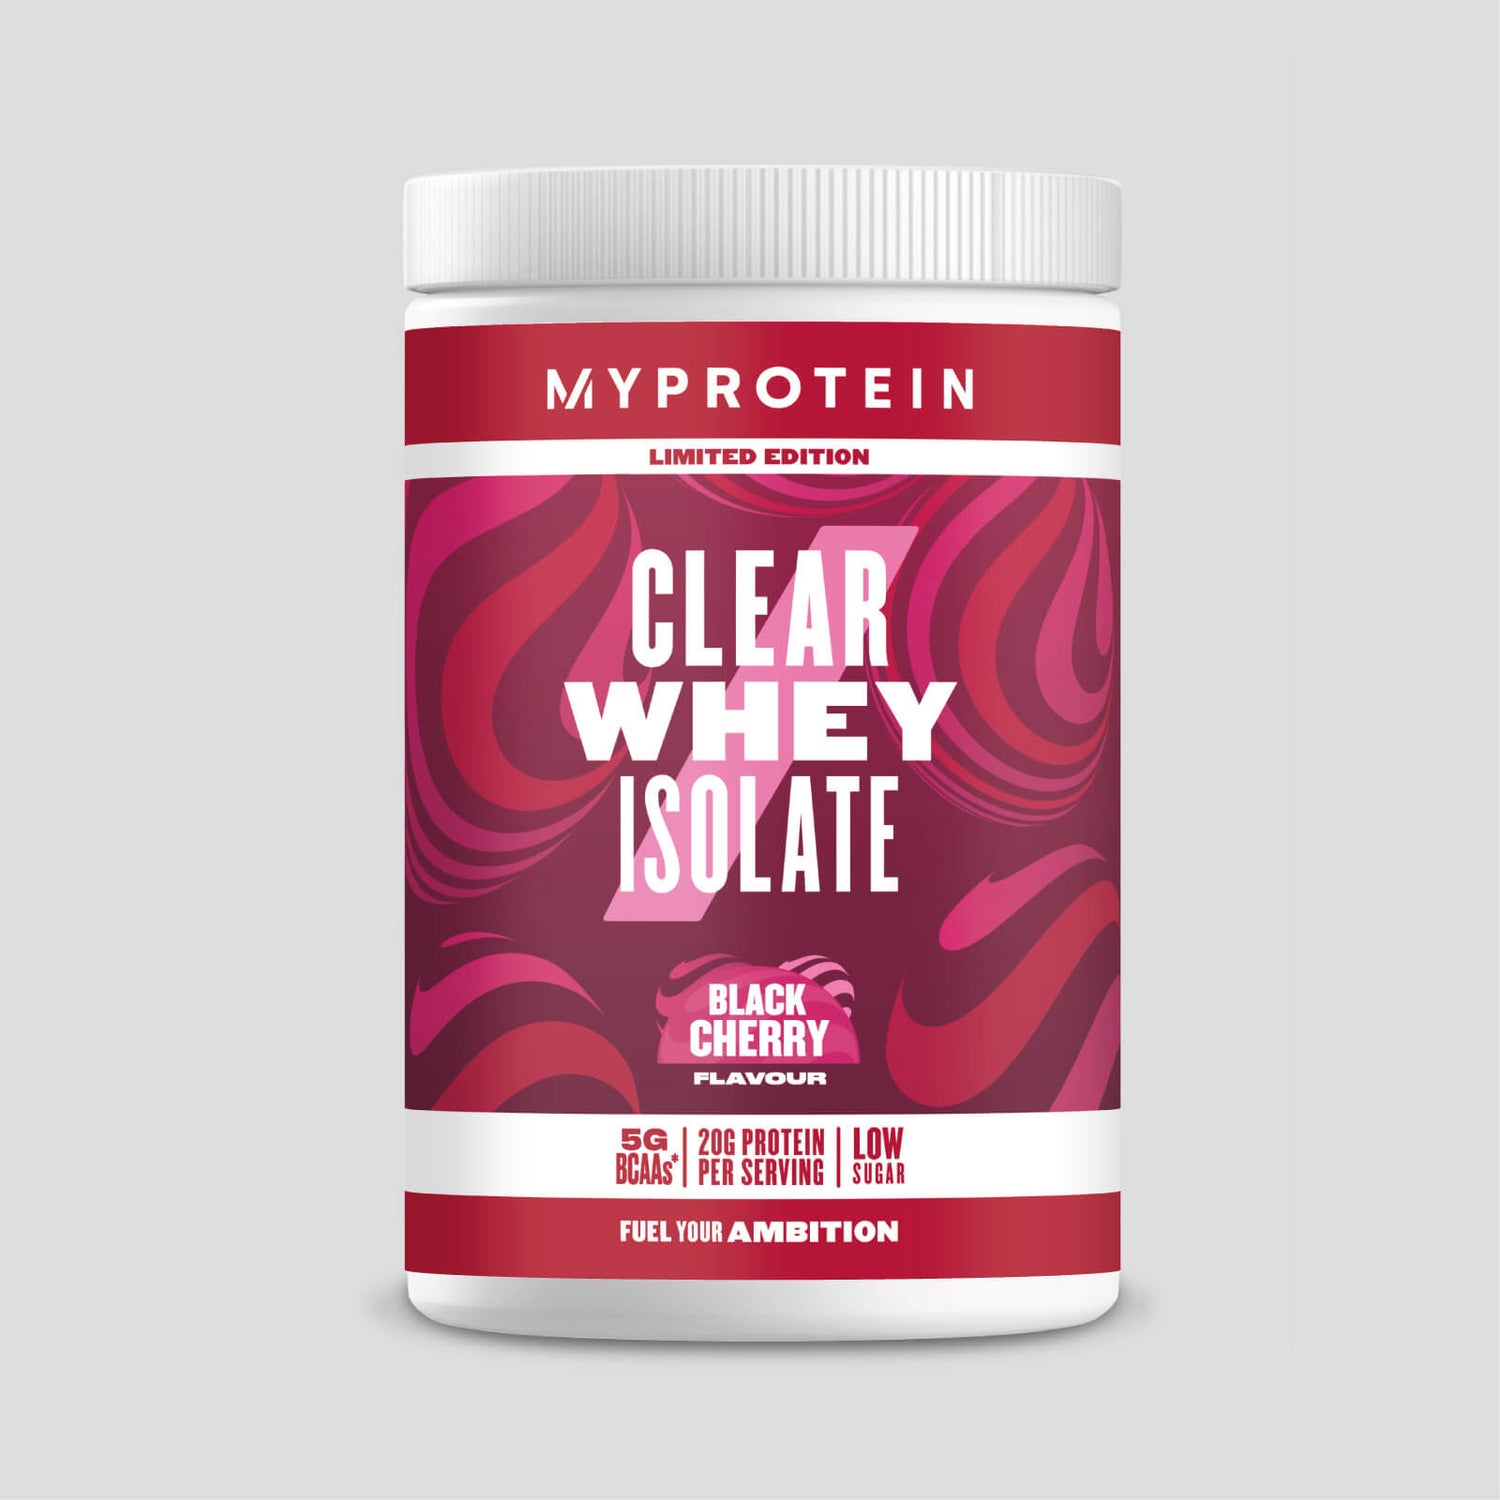 Clear Whey Isolate - Black Cherry flavour